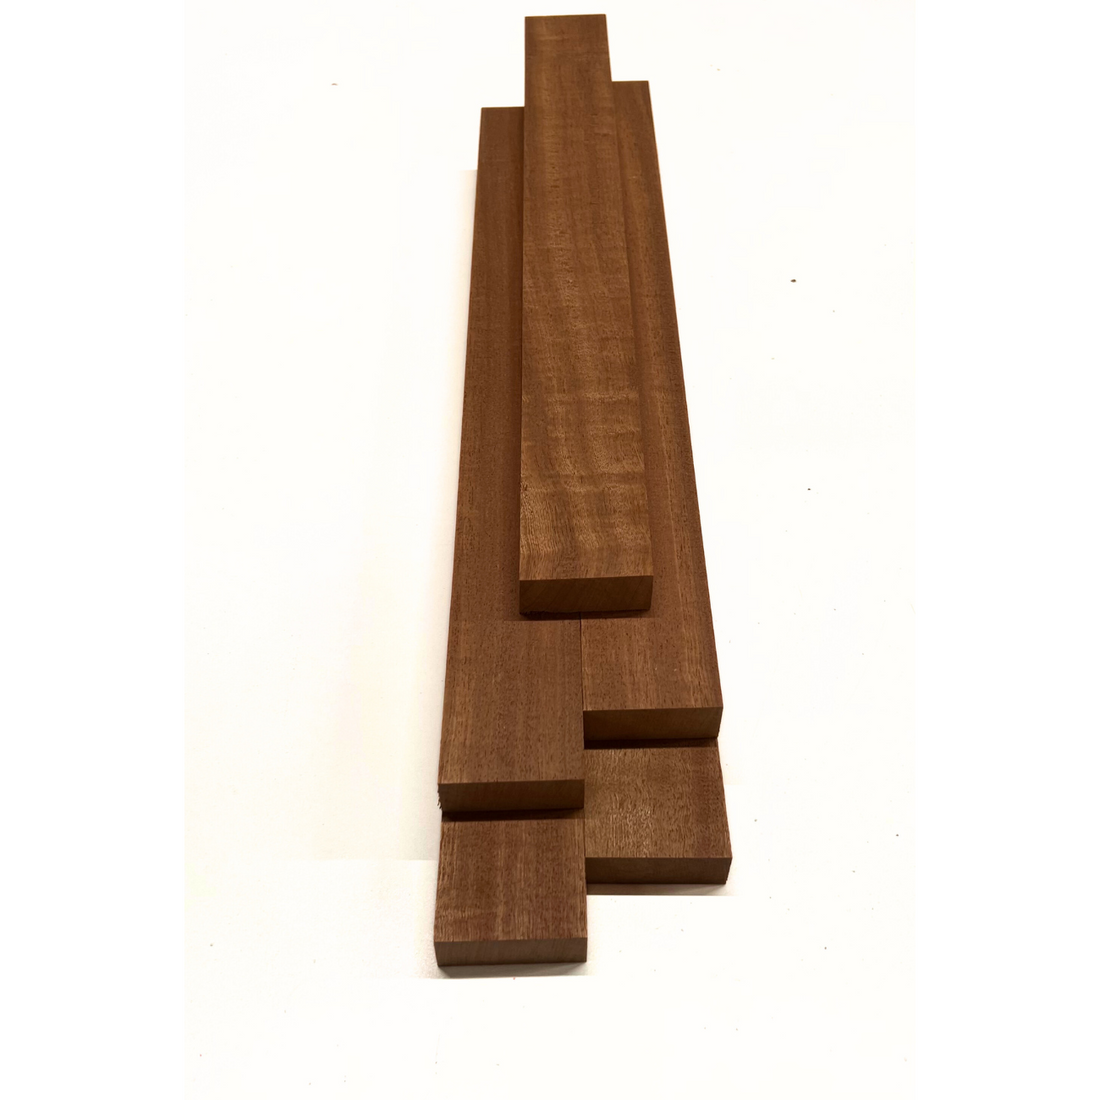 Pack Of 5 ,Quilted Curly Sapele 3/4 Lumber Boards/Cutting Board Blocks - Exotic Wood Zone - Buy online Across USA 